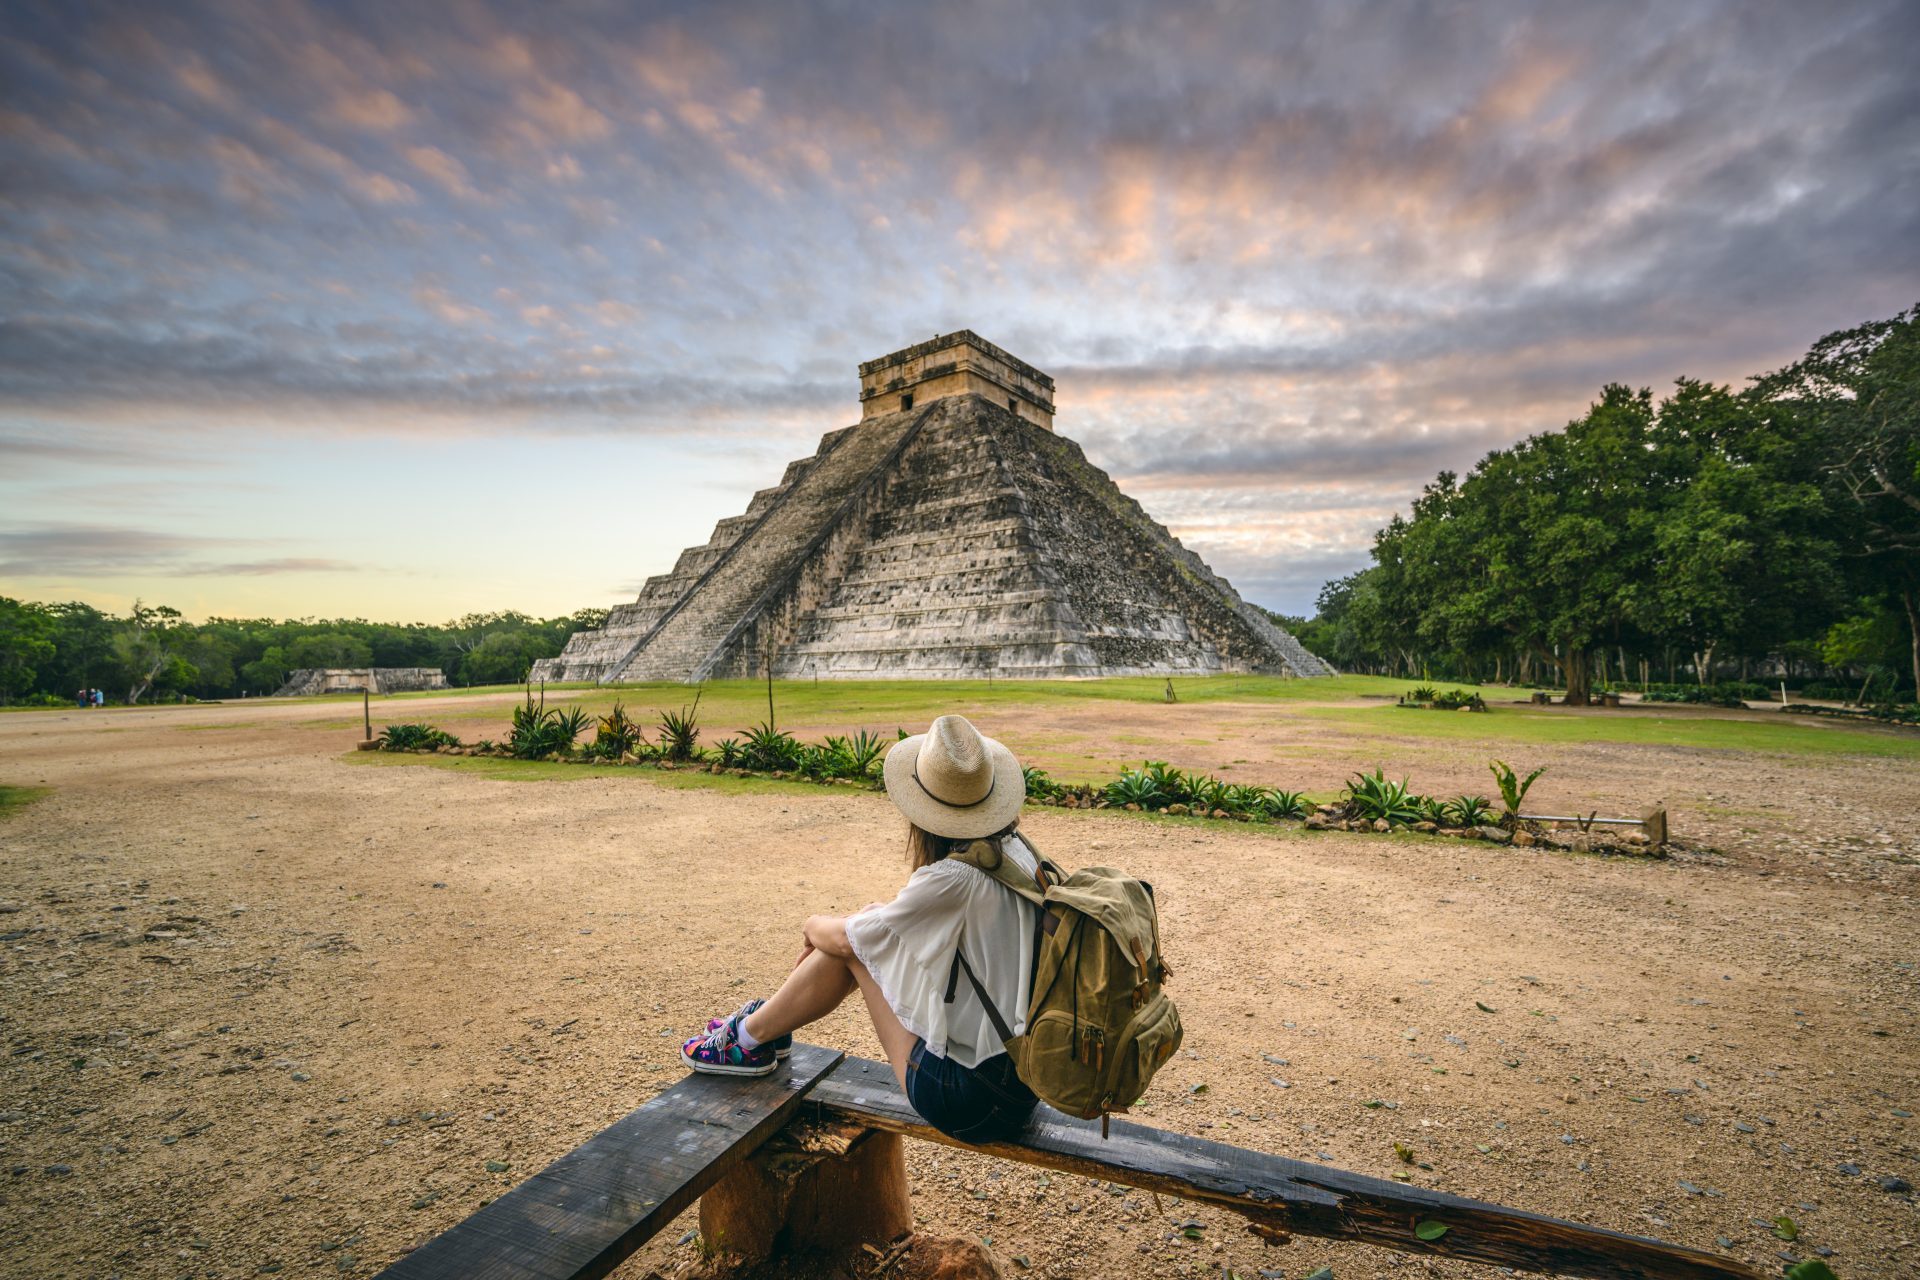 The allure of Chichén Itzá draws millions of tourists